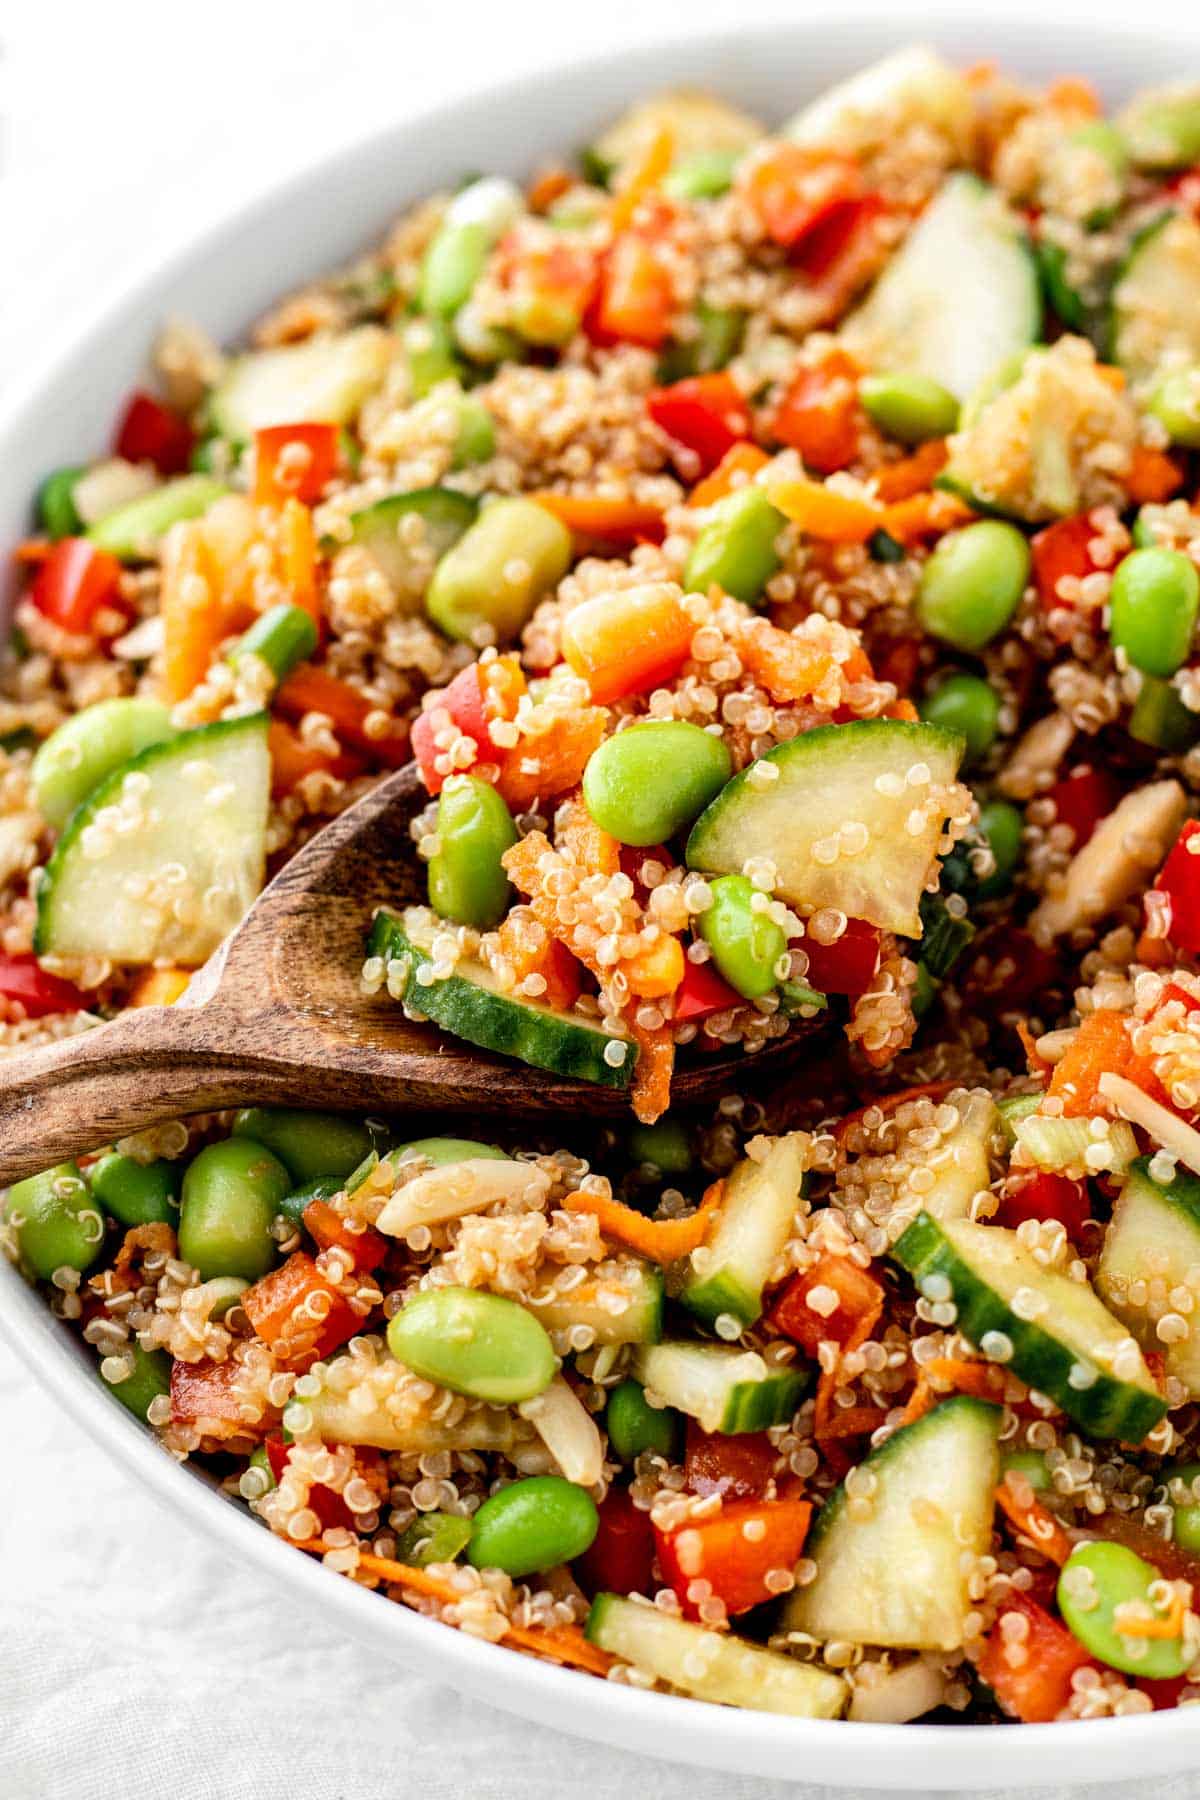 A close-up of a large spoonful of the quinoa edamame salad.